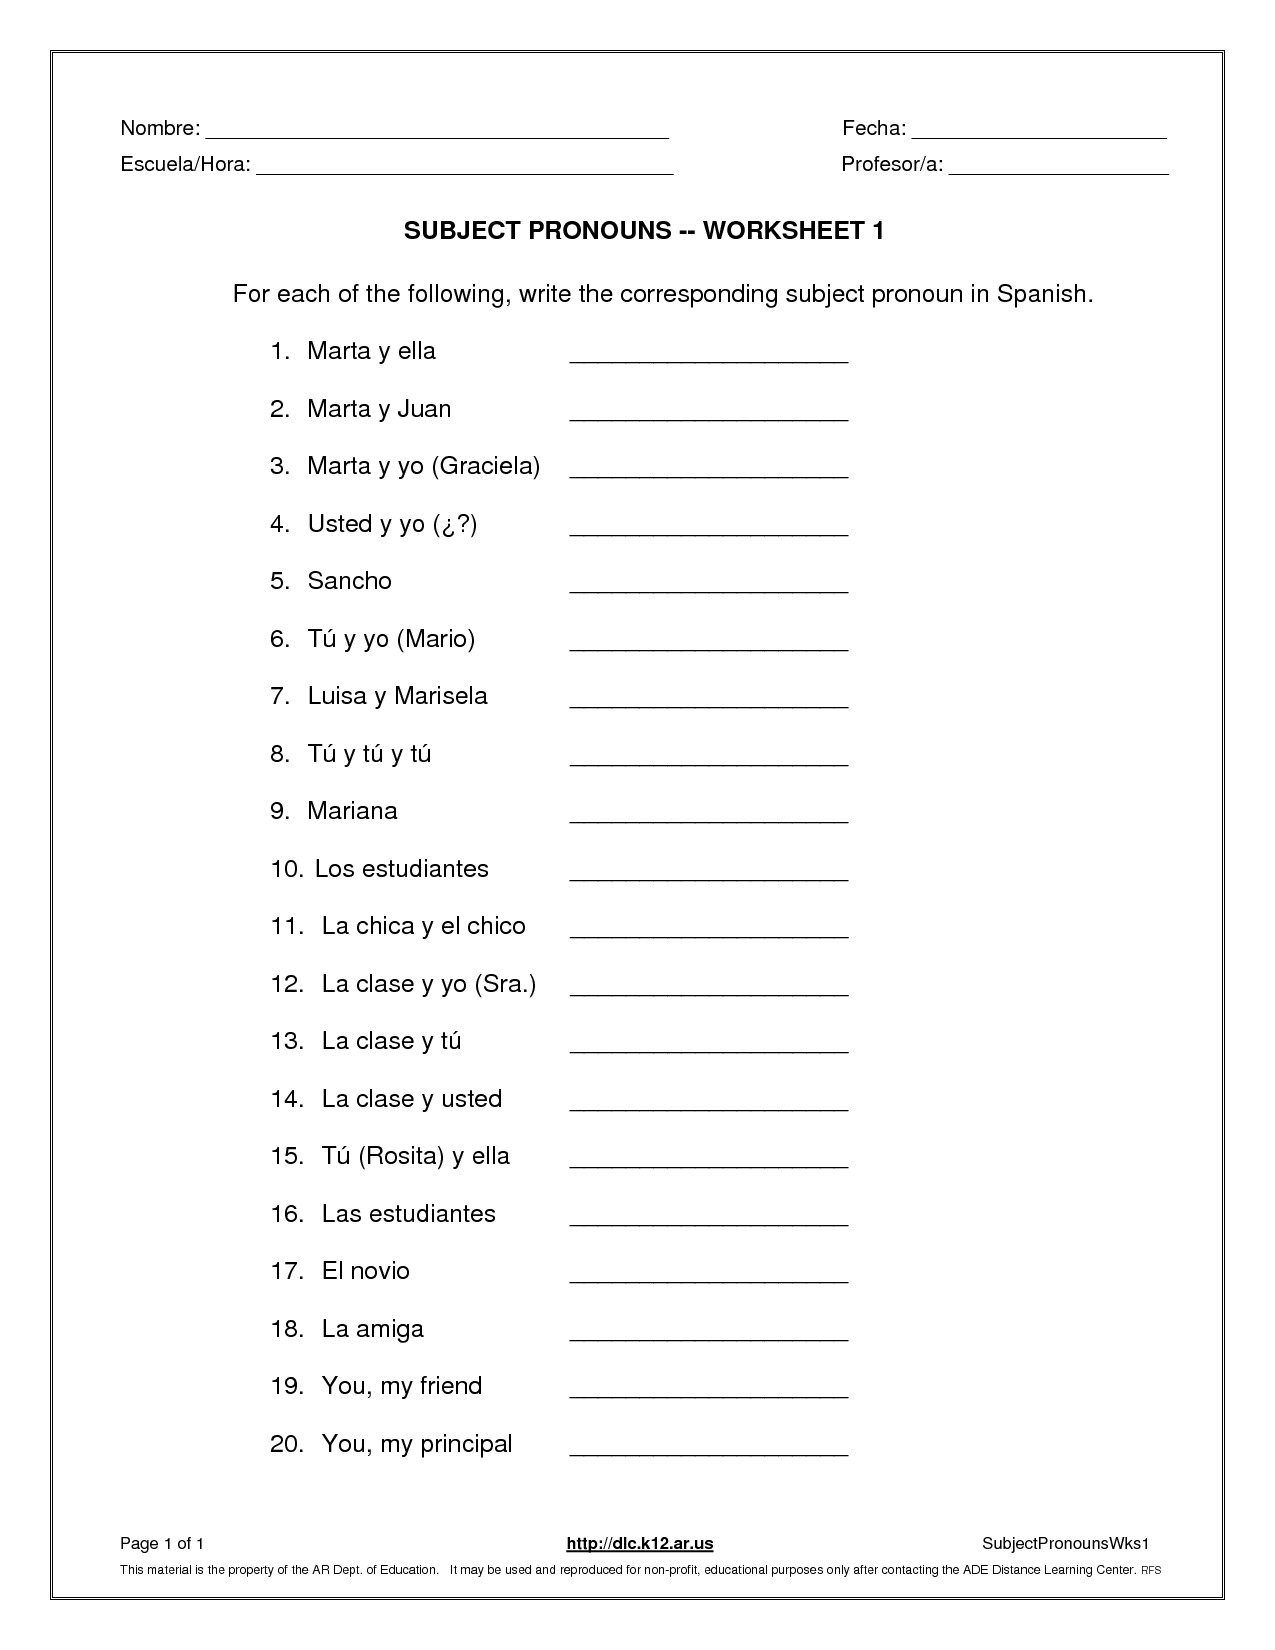 family-and-pronouns-interactive-worksheet